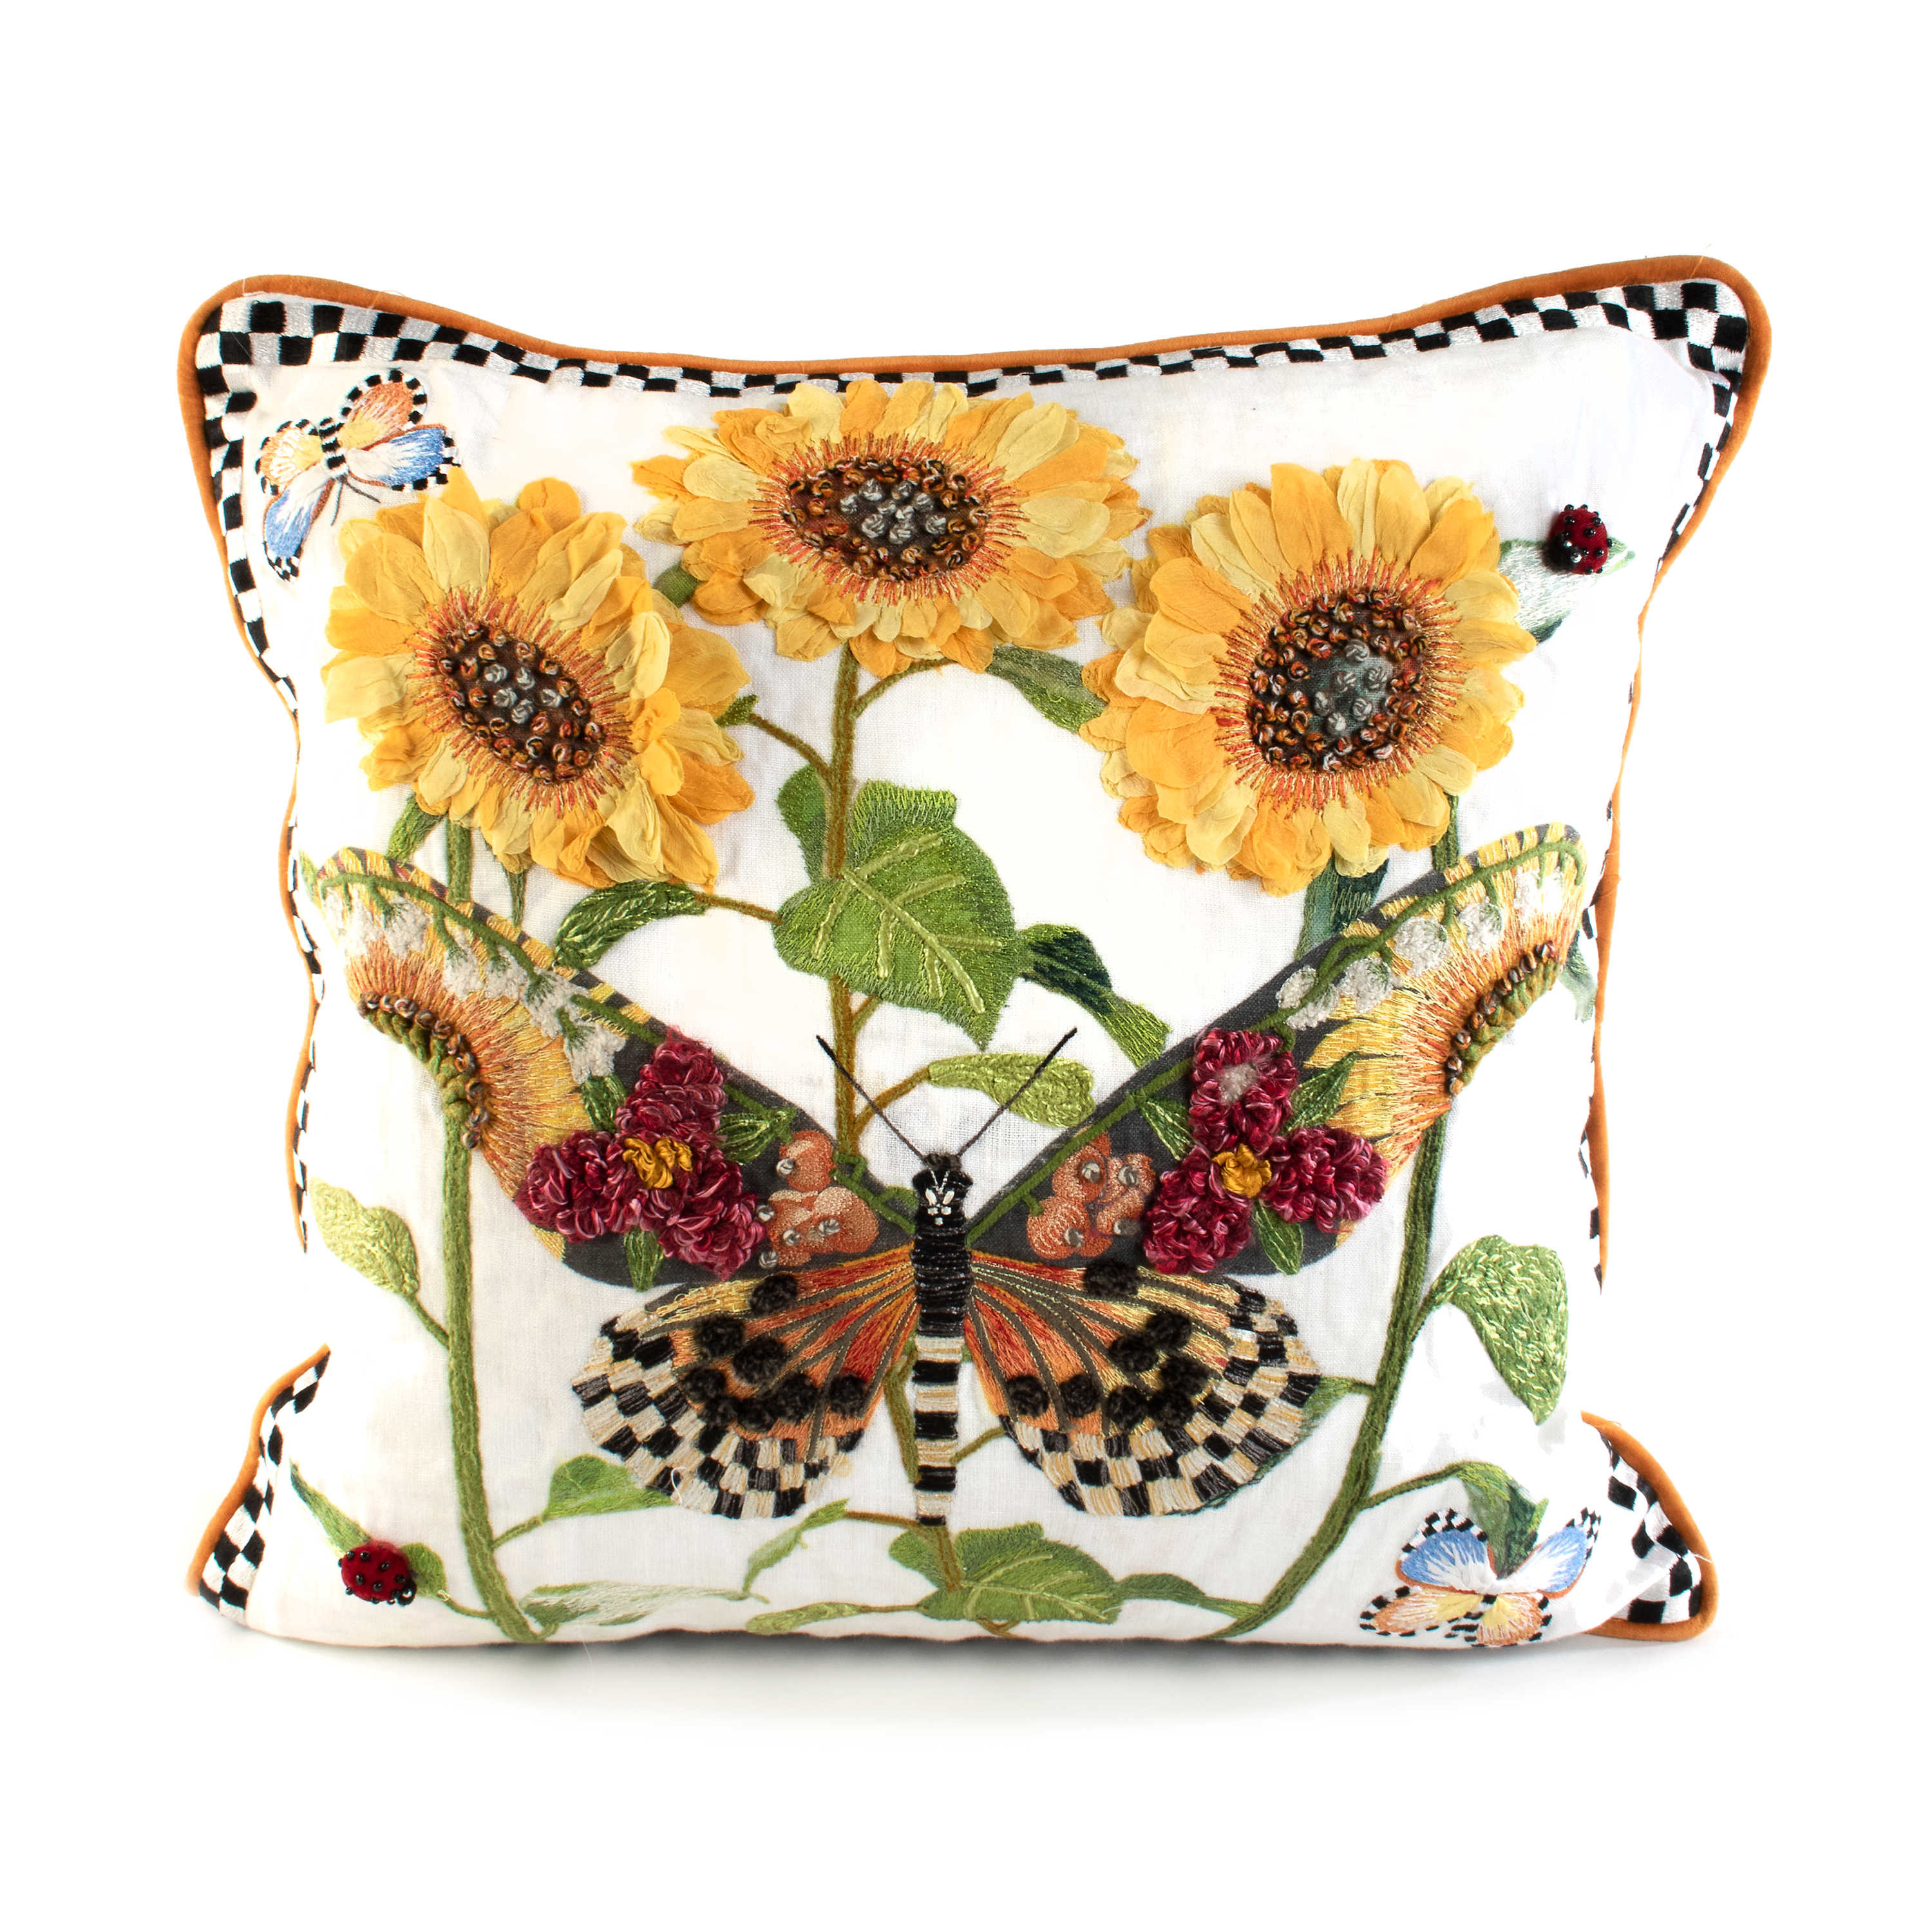 Monarch Butterfly Square Pillow - White mackenzie-childs Panama 0